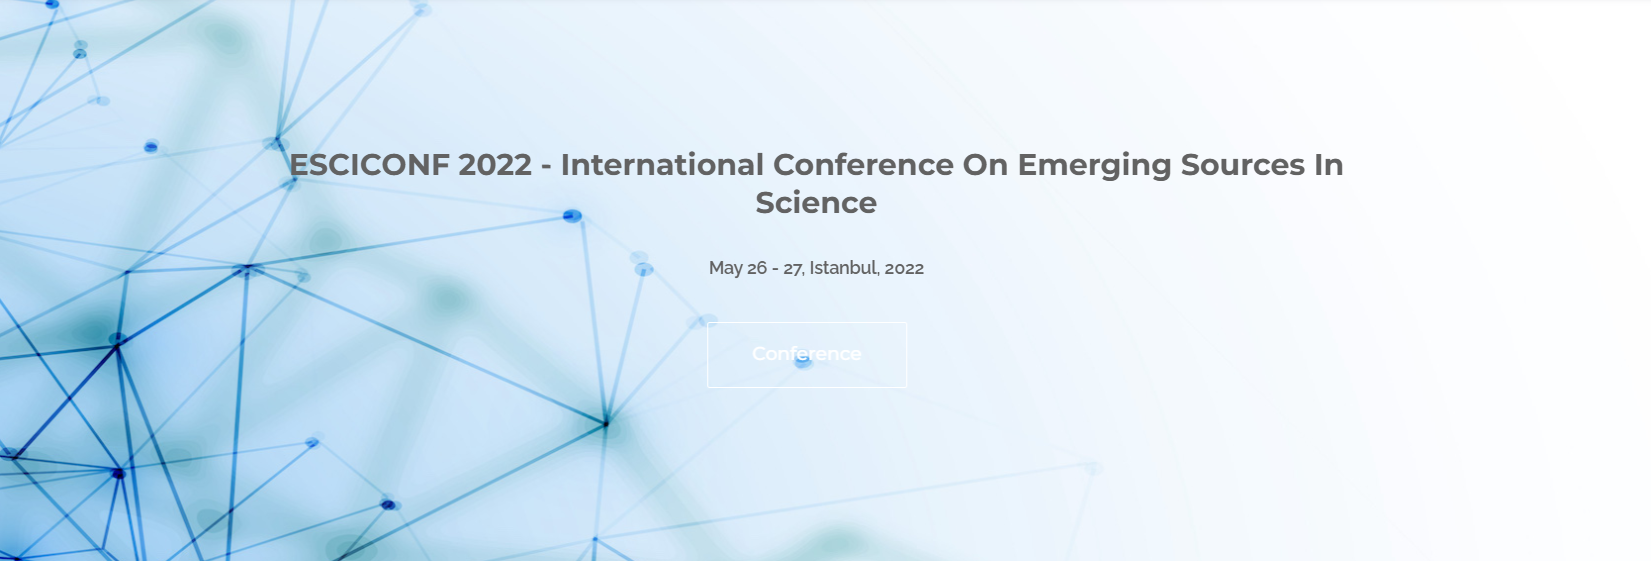 International Conference on Emerging Sources in Science – ESCICONF 2022